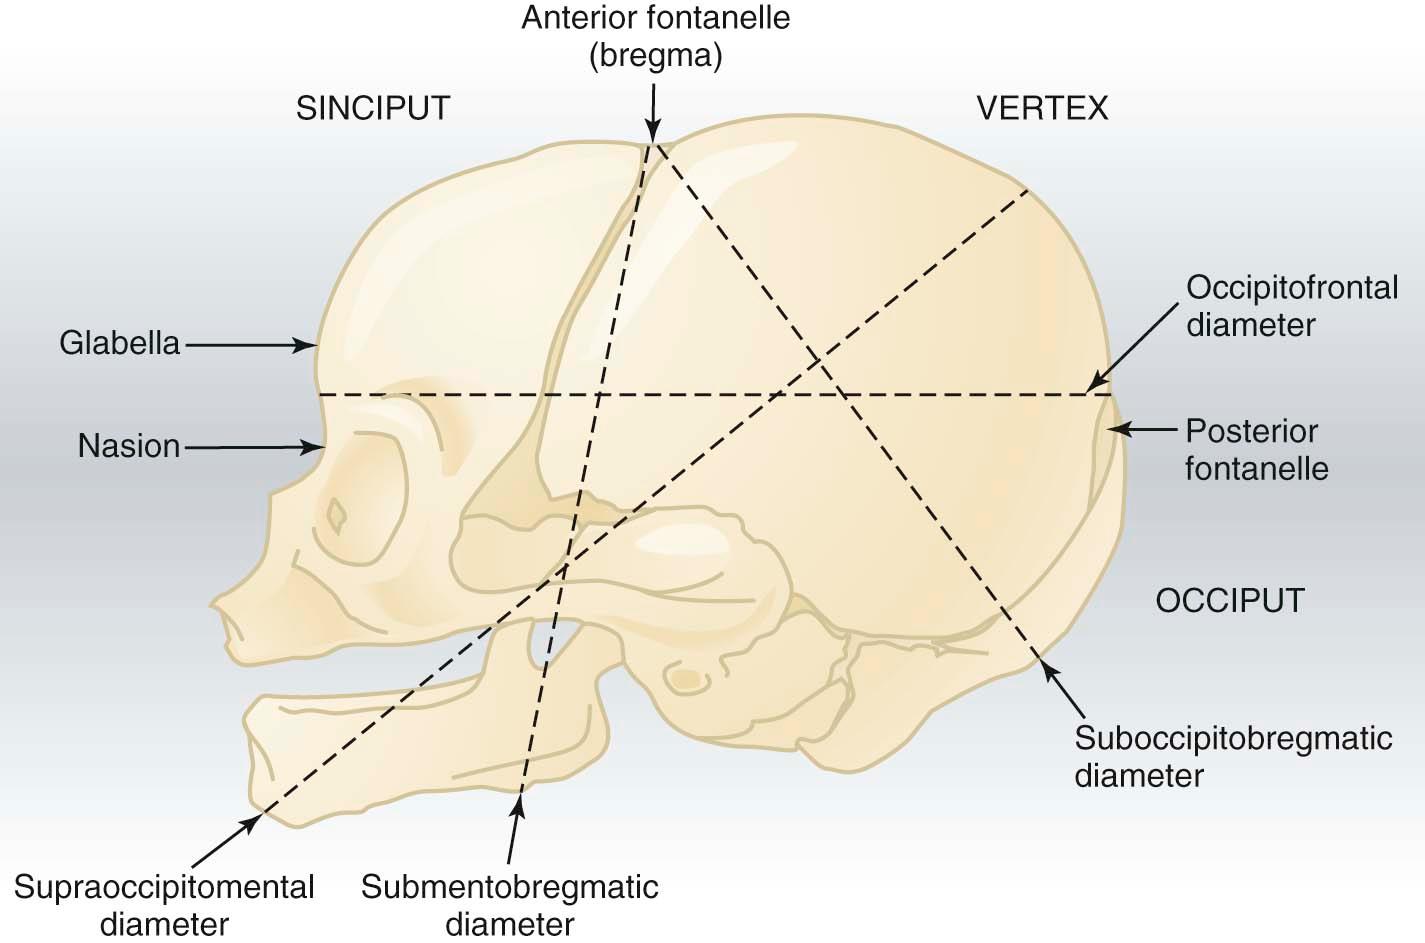 FIGURE 8-2, Lateral view of the fetal skull showing the prominent landmarks and the anteroposterior diameters.